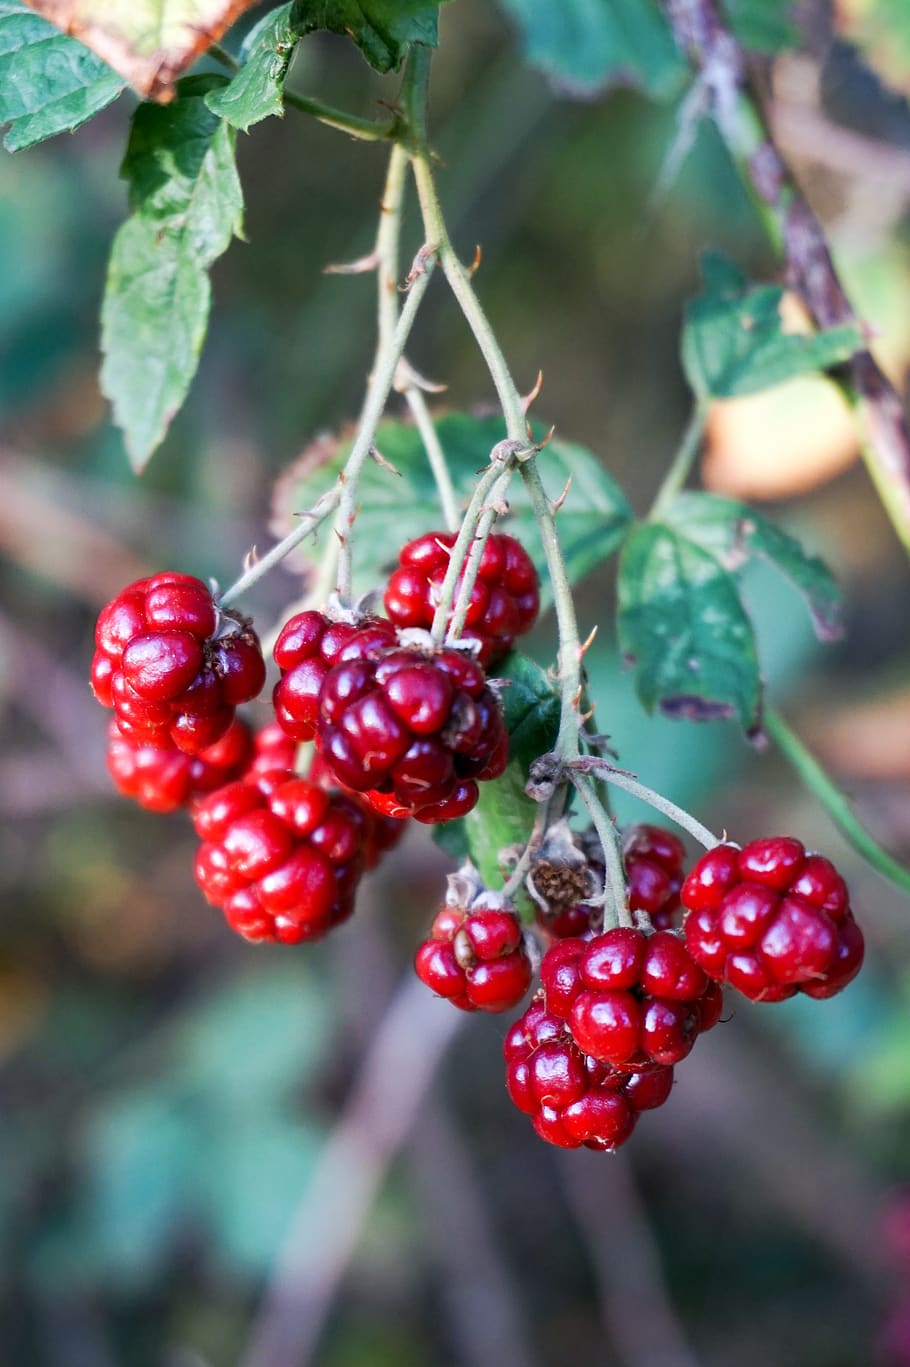 fruits, berries, autumn, forest, nature, red, healthy eating, food, food and drink, berry fruit